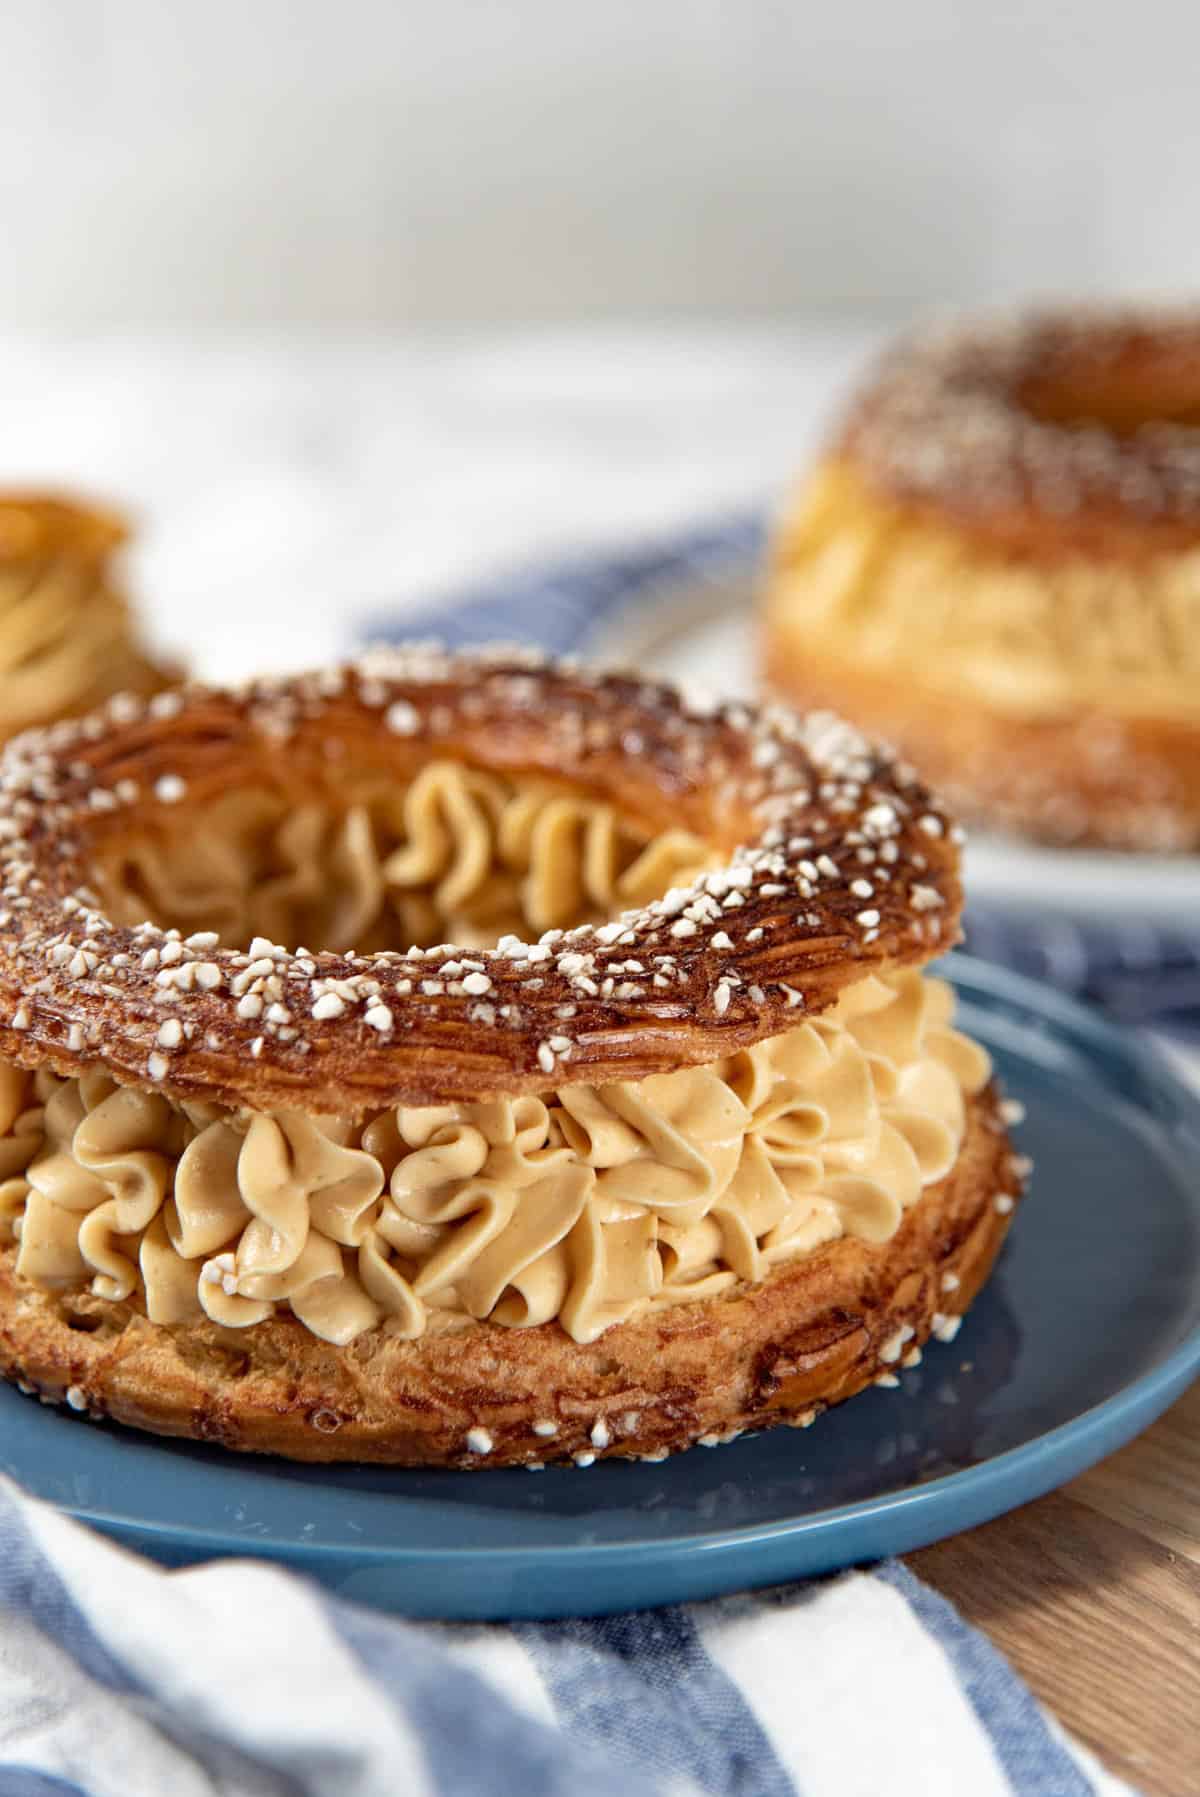 A close up of the Paris Brest pastry, filled with the mousseline cream